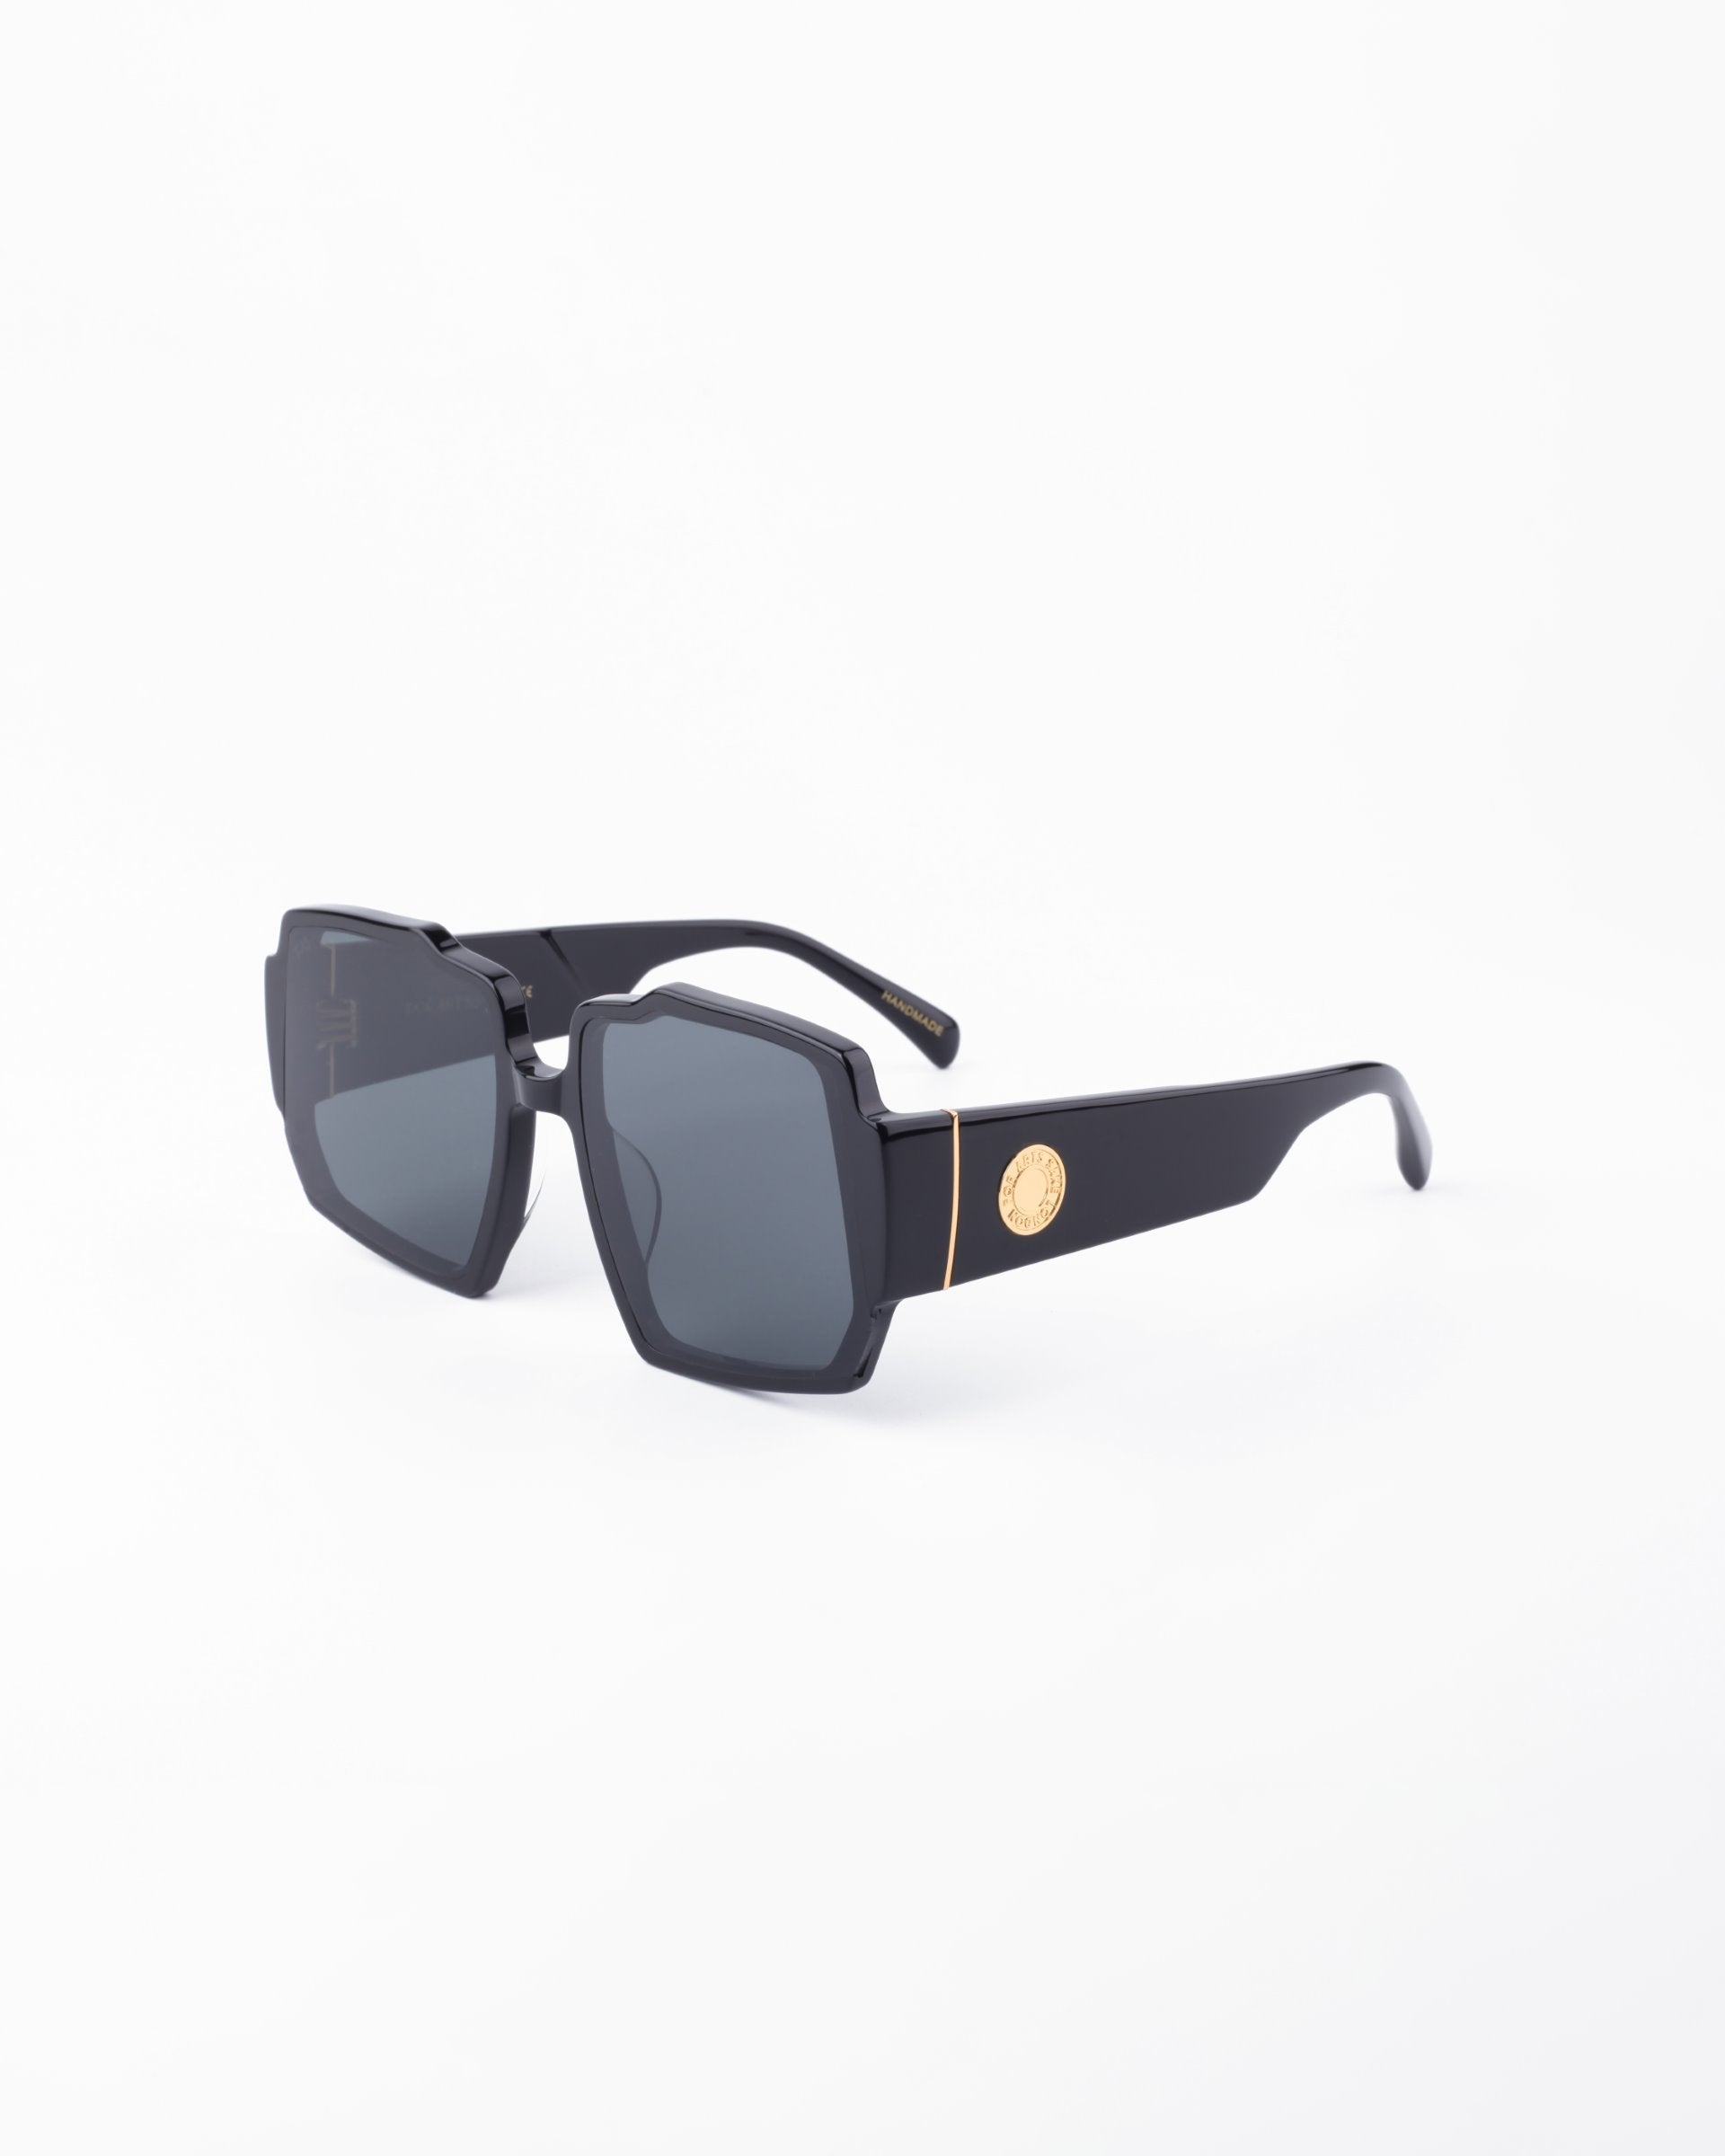 Black oversized sunglasses with chunky acetate frames, featuring gold accents on the temples. The UV-protected lenses are dark and slightly reflective. The overall style is bold and modern, suitable for fashion-forward wear. Introducing the Moritz by For Art's Sake®. The background is plain white.